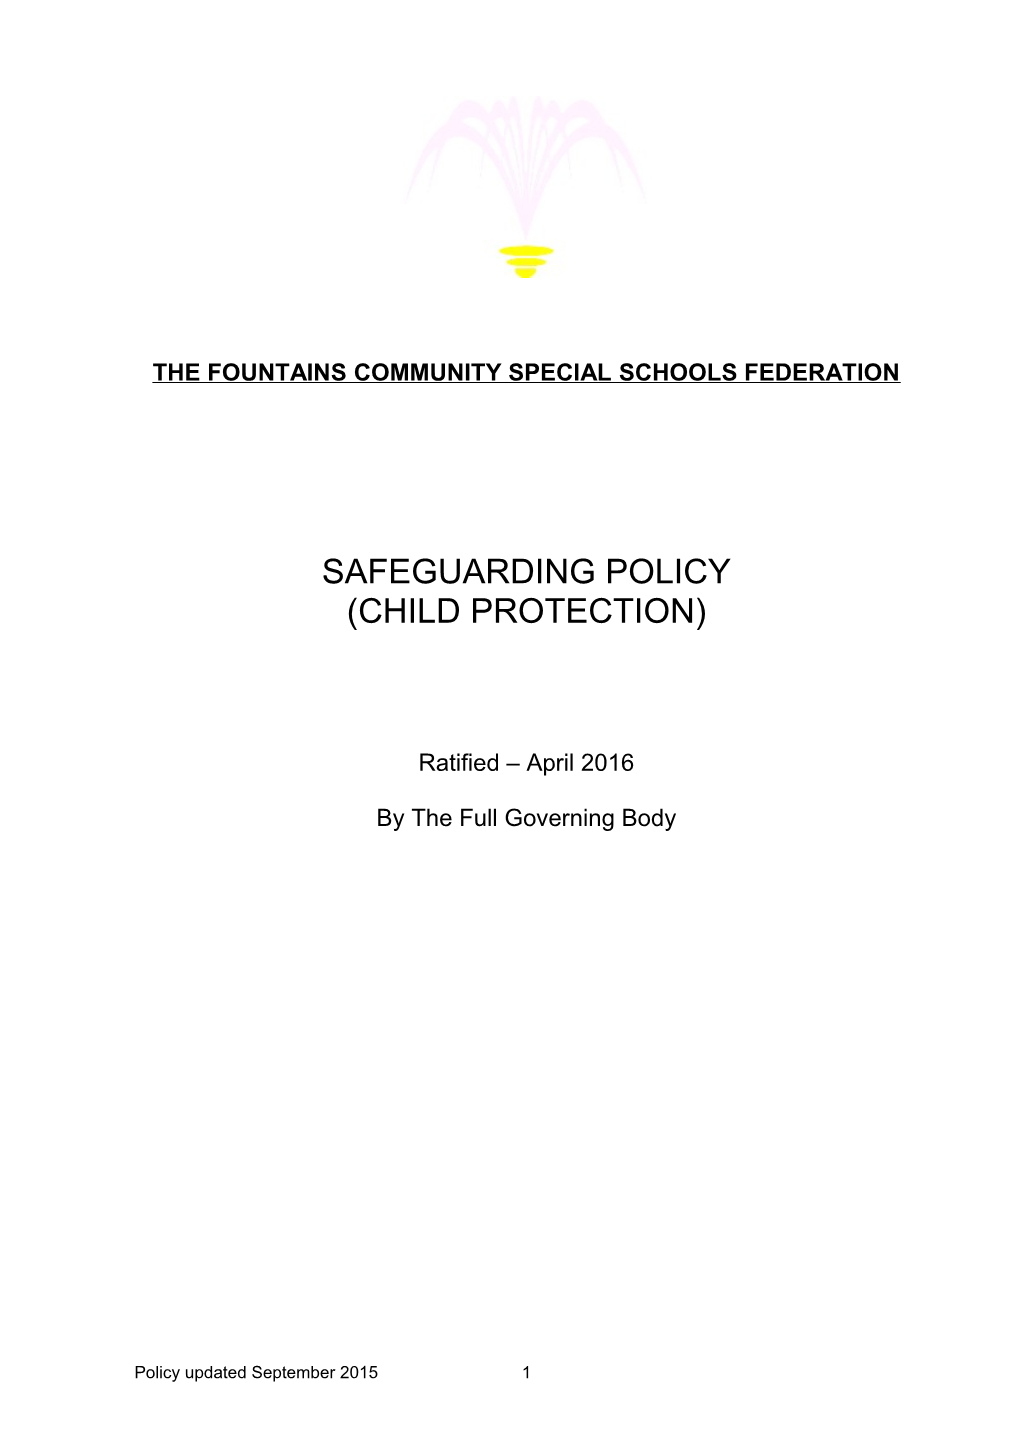 The Fountains Community Special Schools Federation